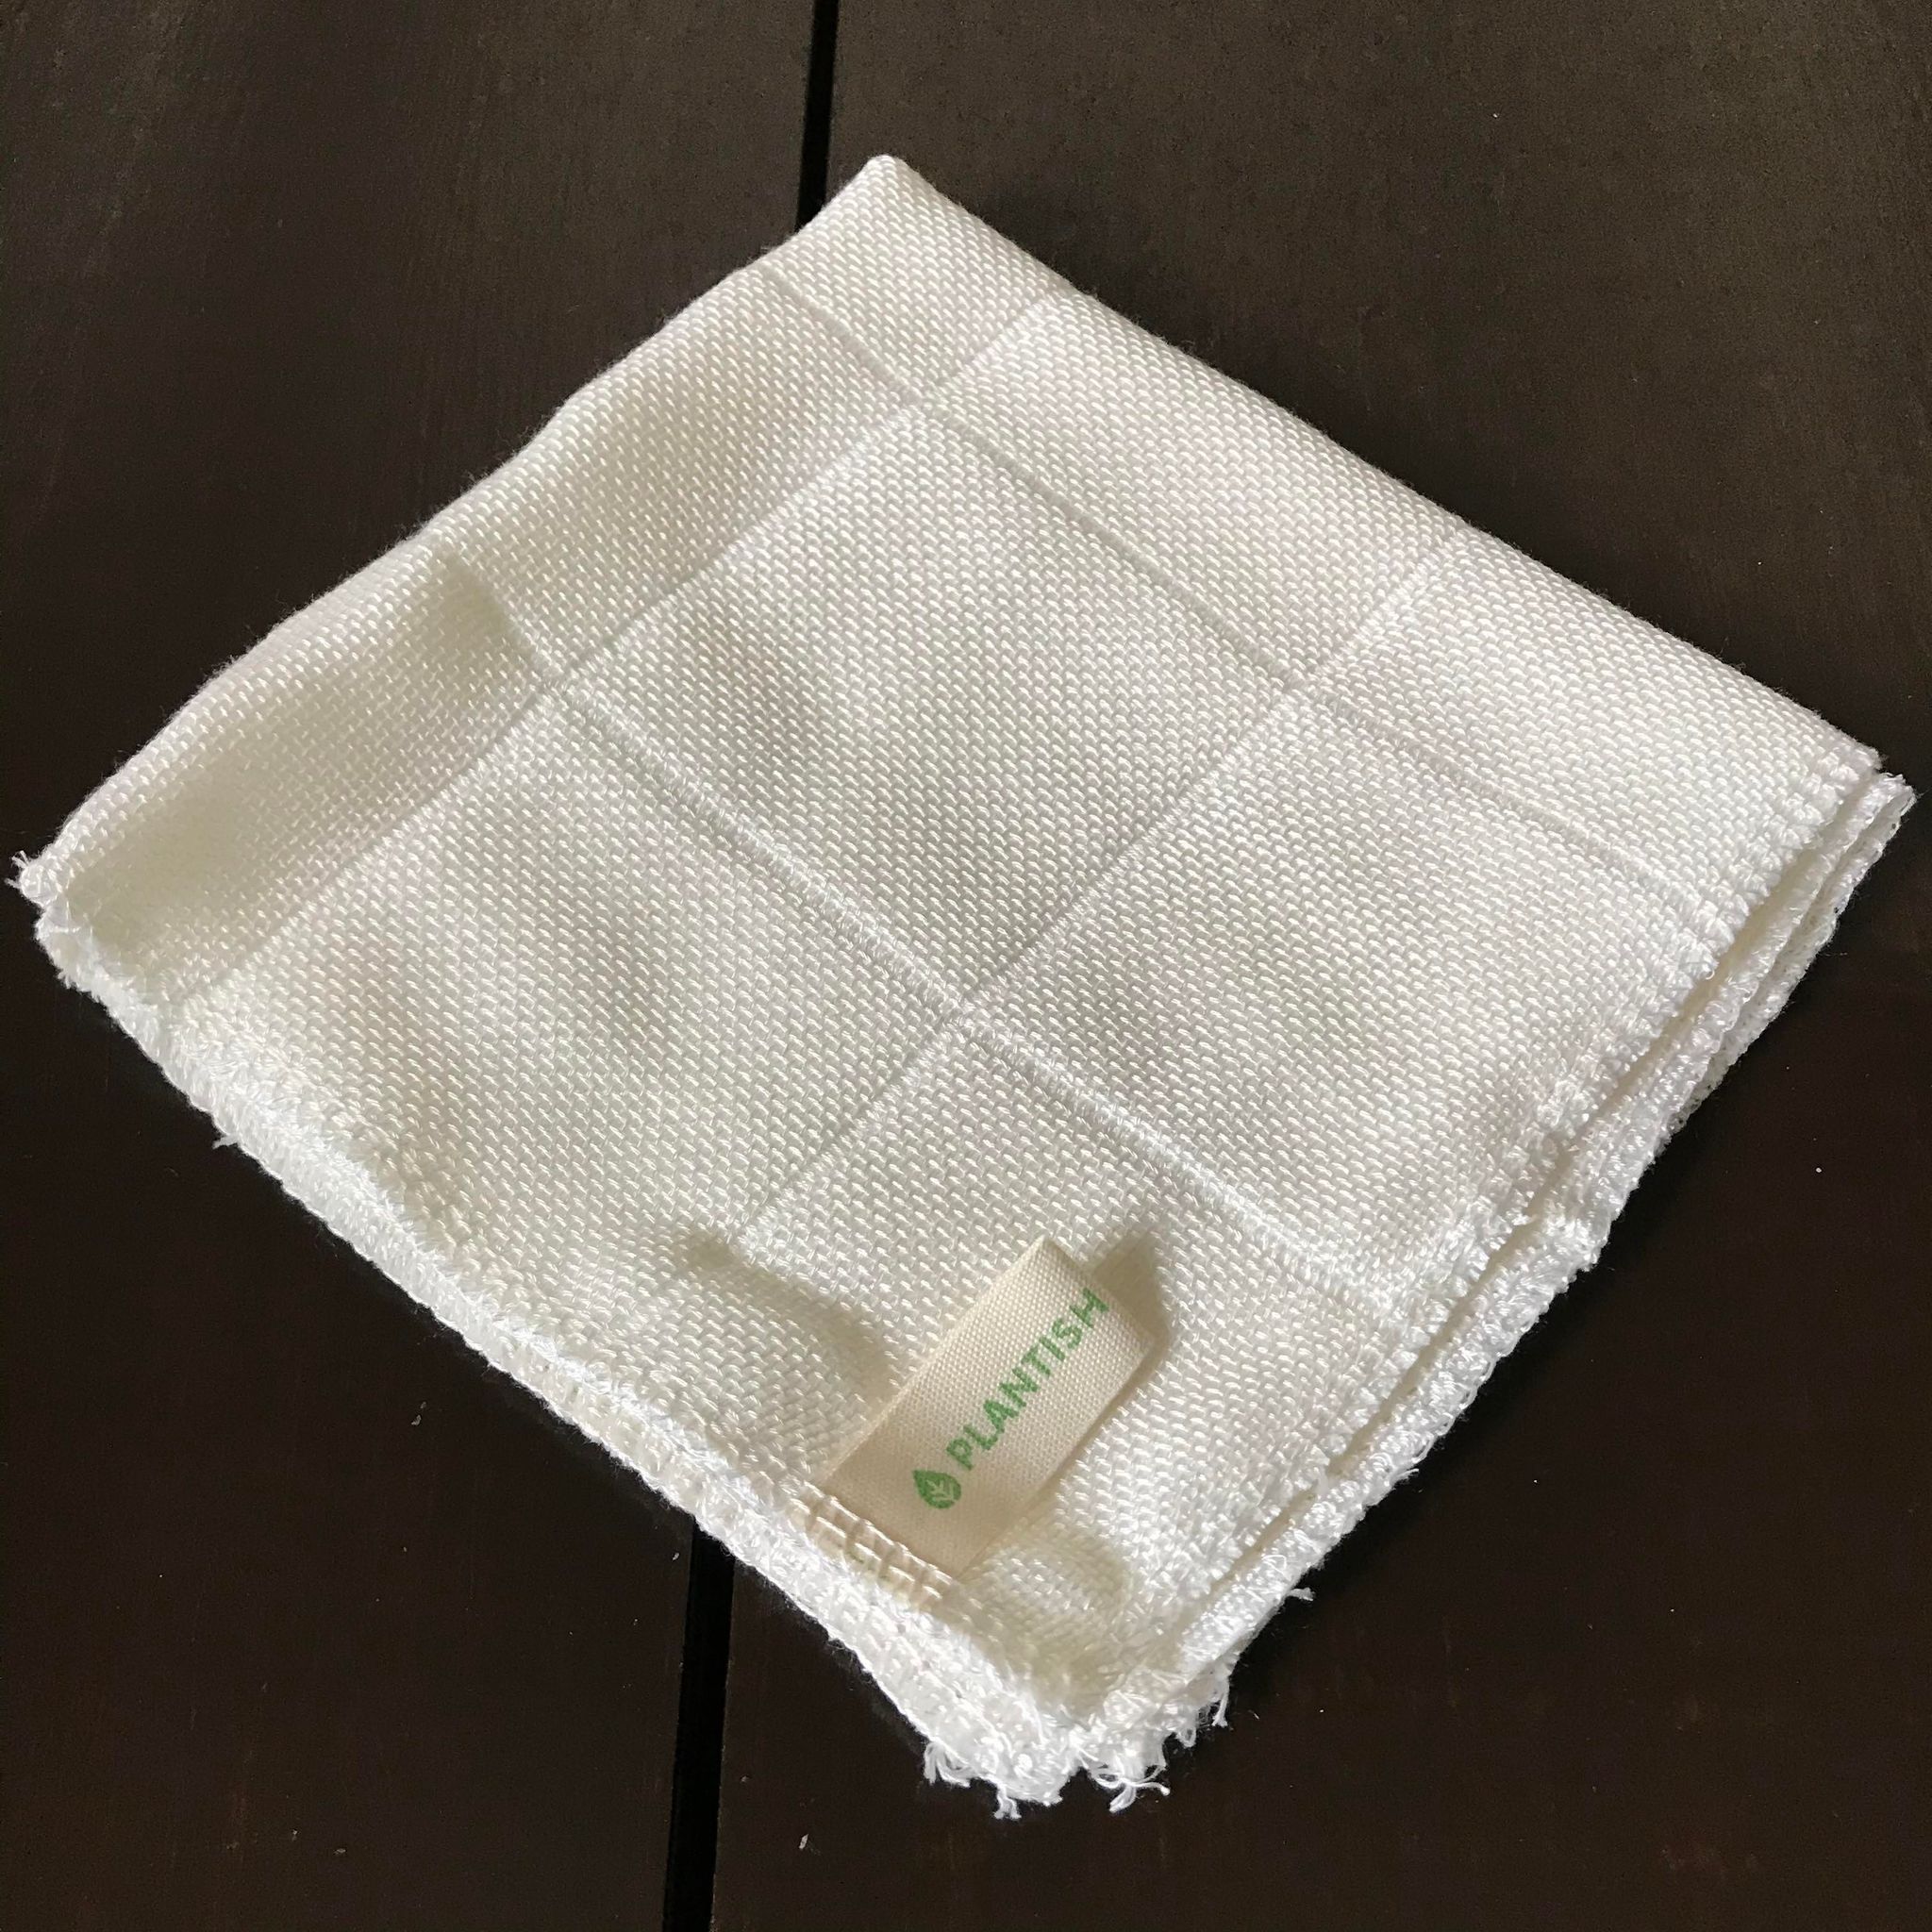 Individaul white compostable, antibacterial, oil-resistant and lint-free bamboo cloth made by Plantish